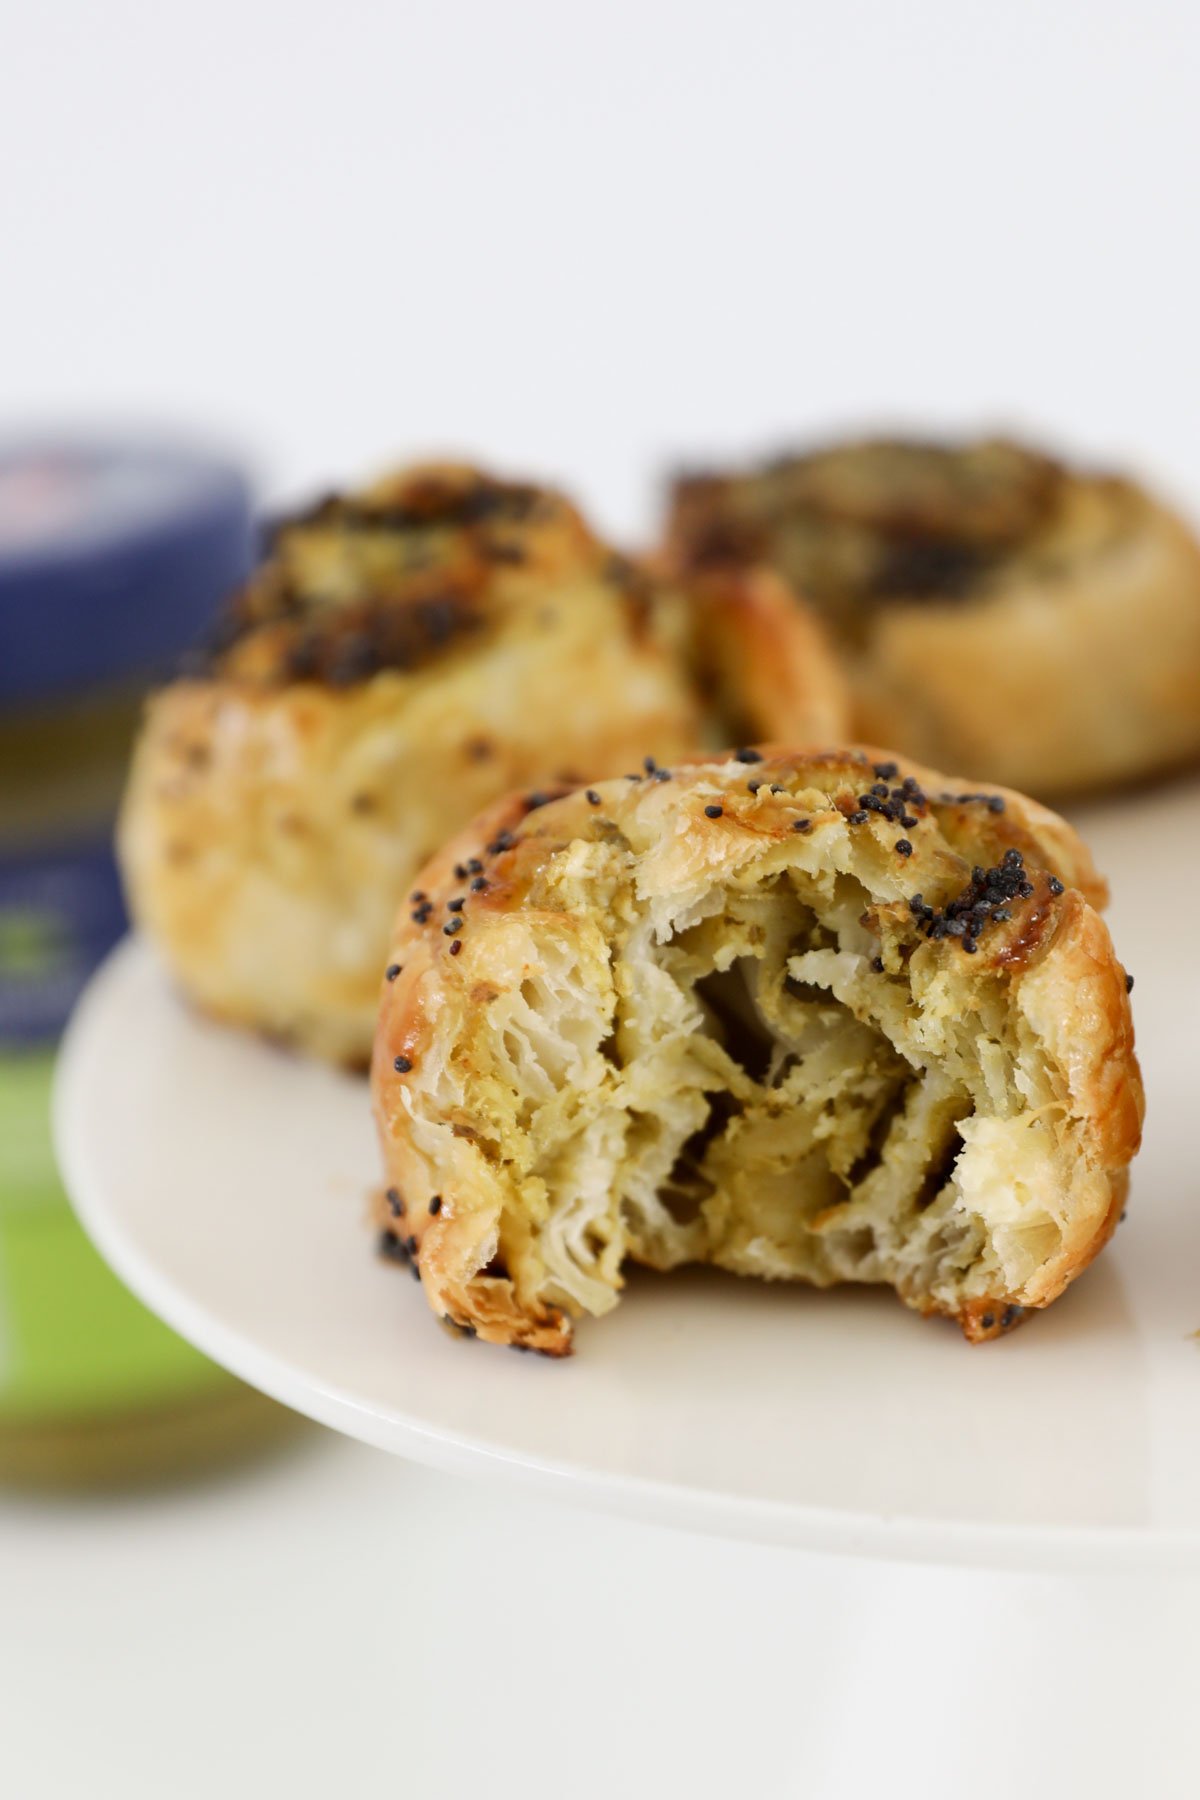 Pesto pastry rolls on a plate.